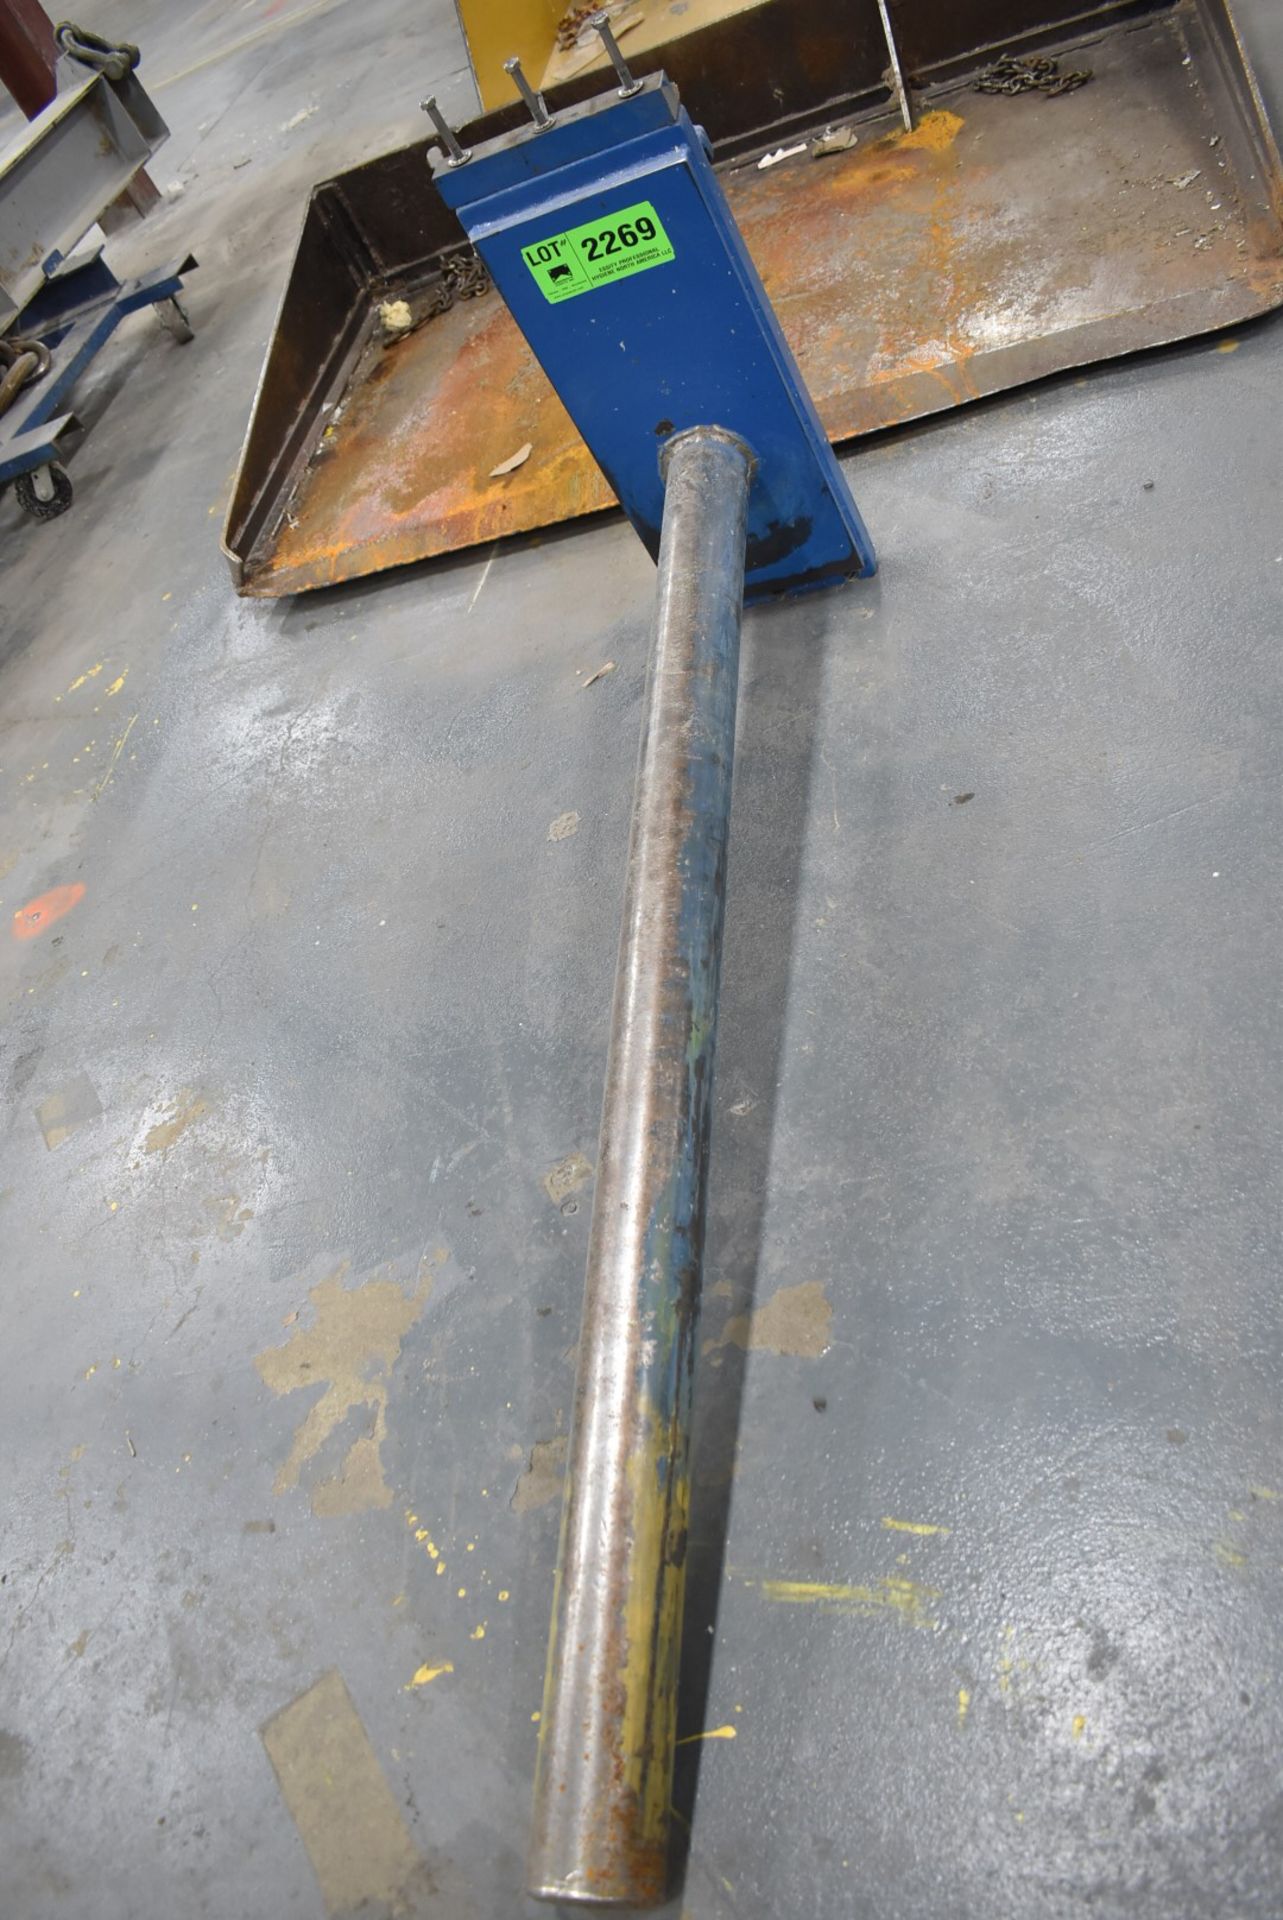 68" L FORKLIFT POLE ATTACHMENT [RIGGING FEES FOR LOT #2269 - $25 USD PLUS APPLICABLE TAXES]